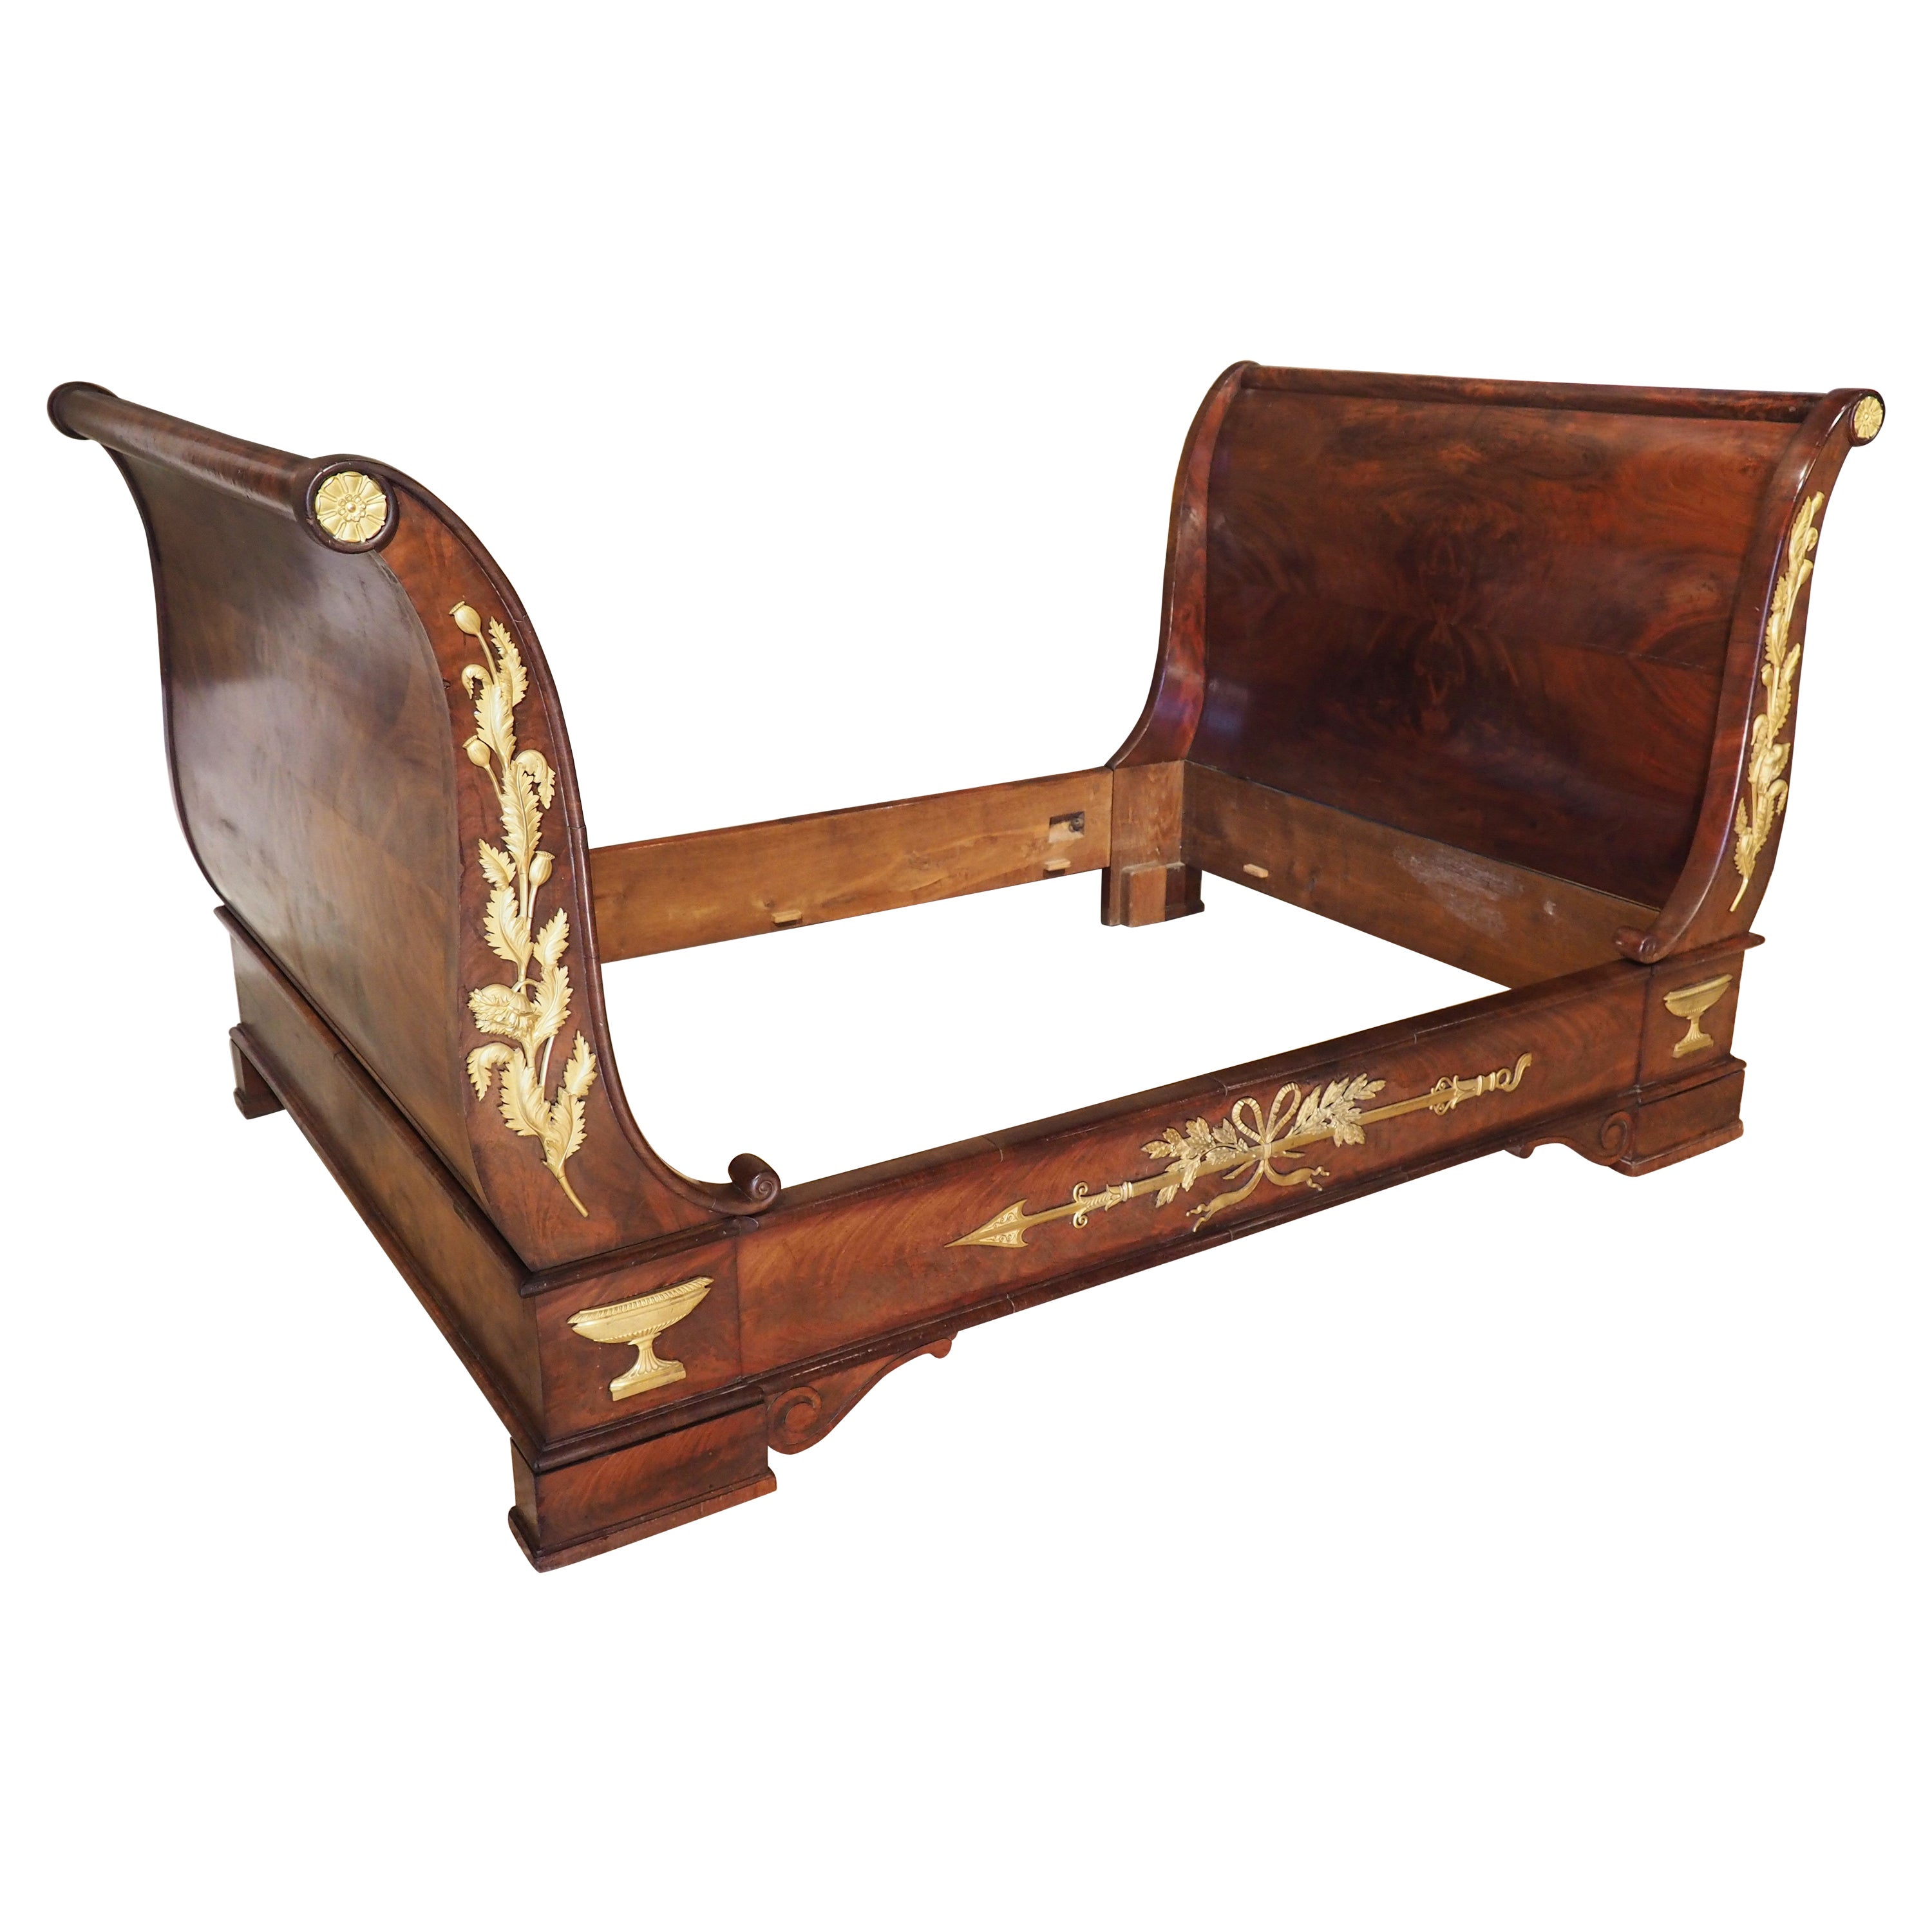 Antique French Empire Mahogany Day Bed with Gilt Bronze Mounts, Circa 1815